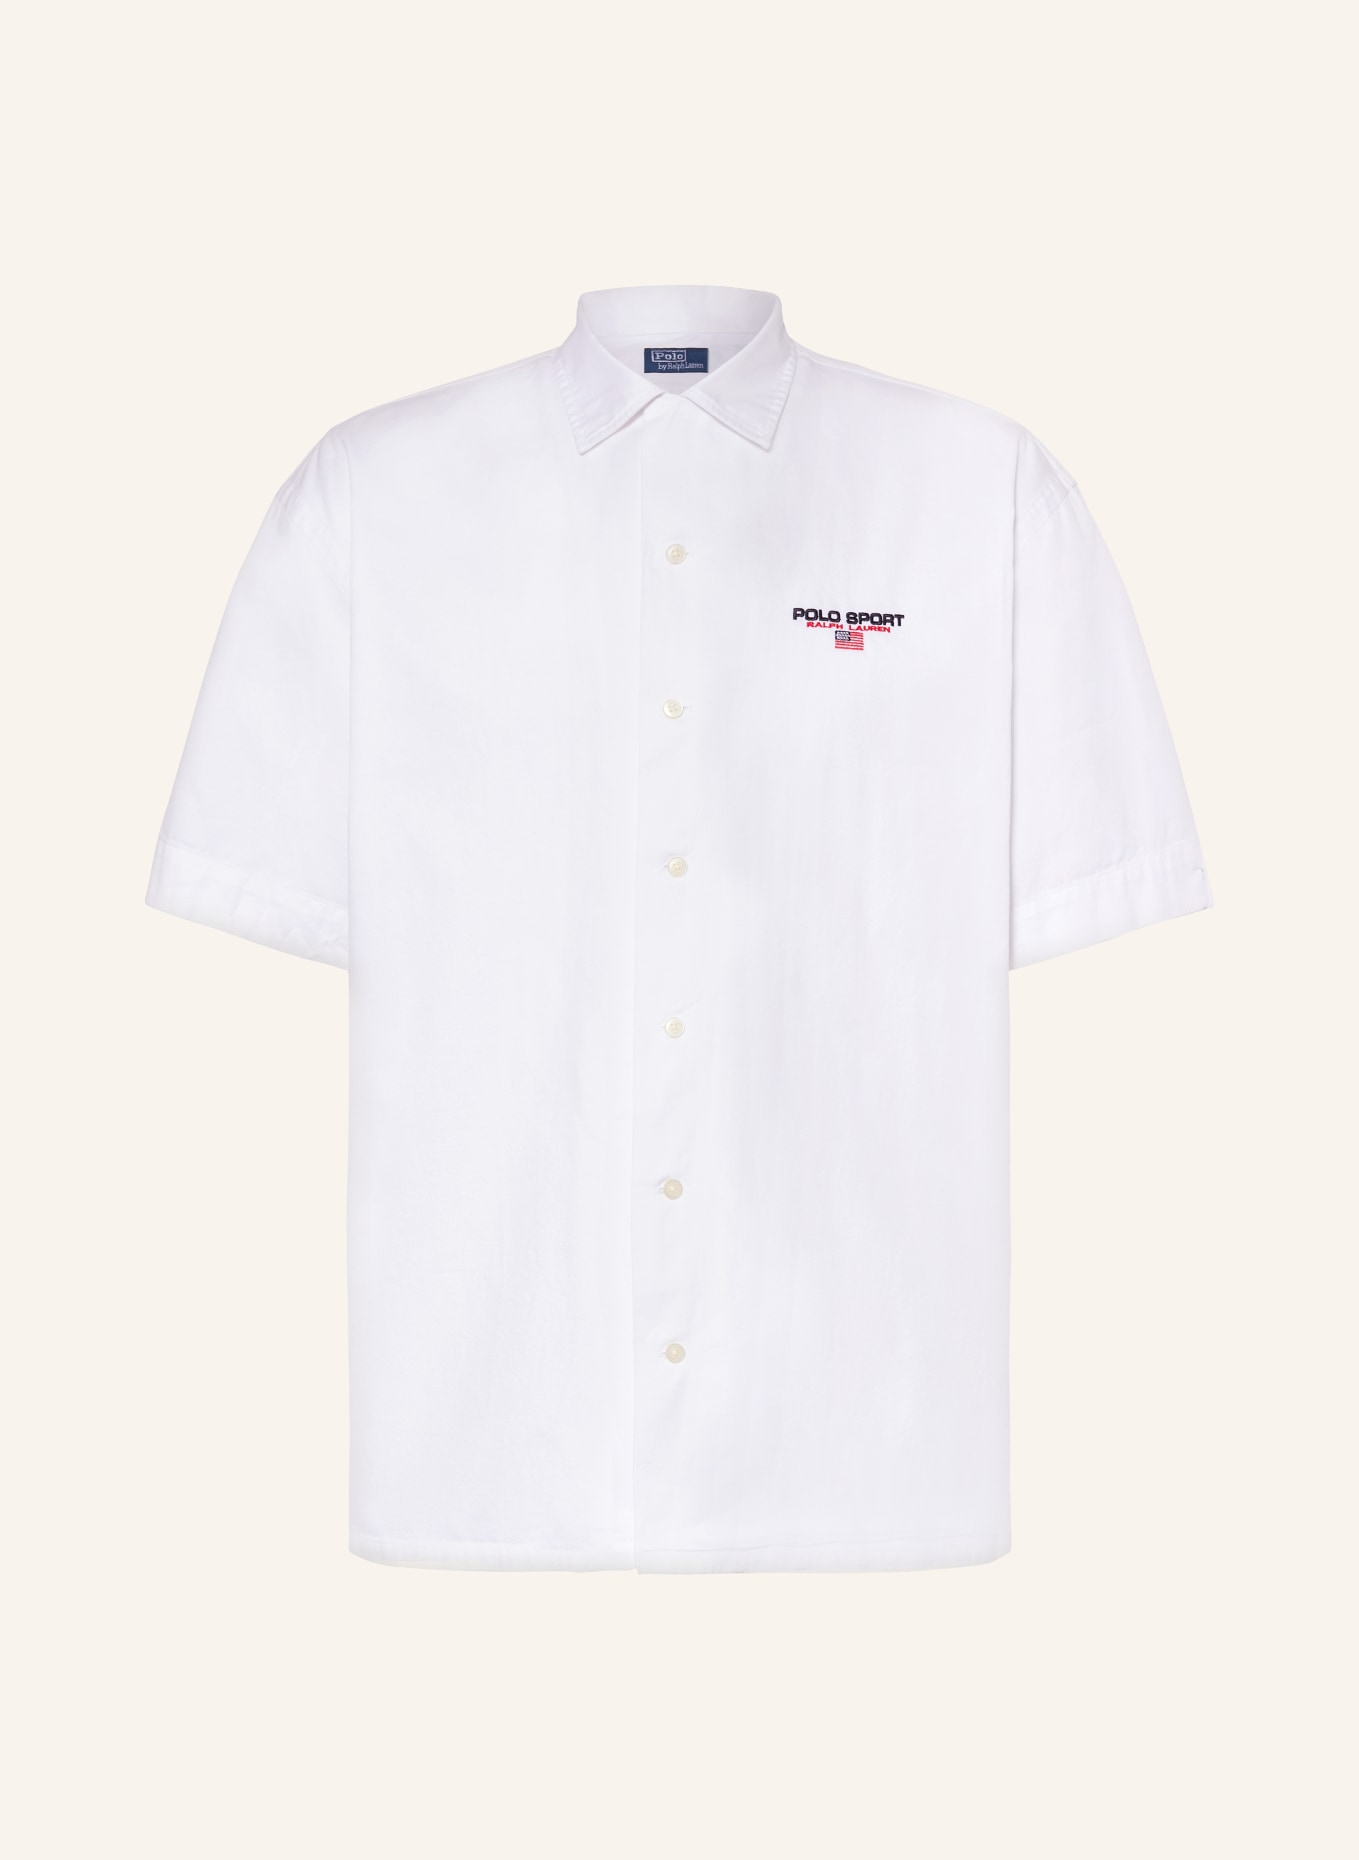 POLO SPORT Short sleeve shirt comfort fit, Color: WHITE (Image 1)